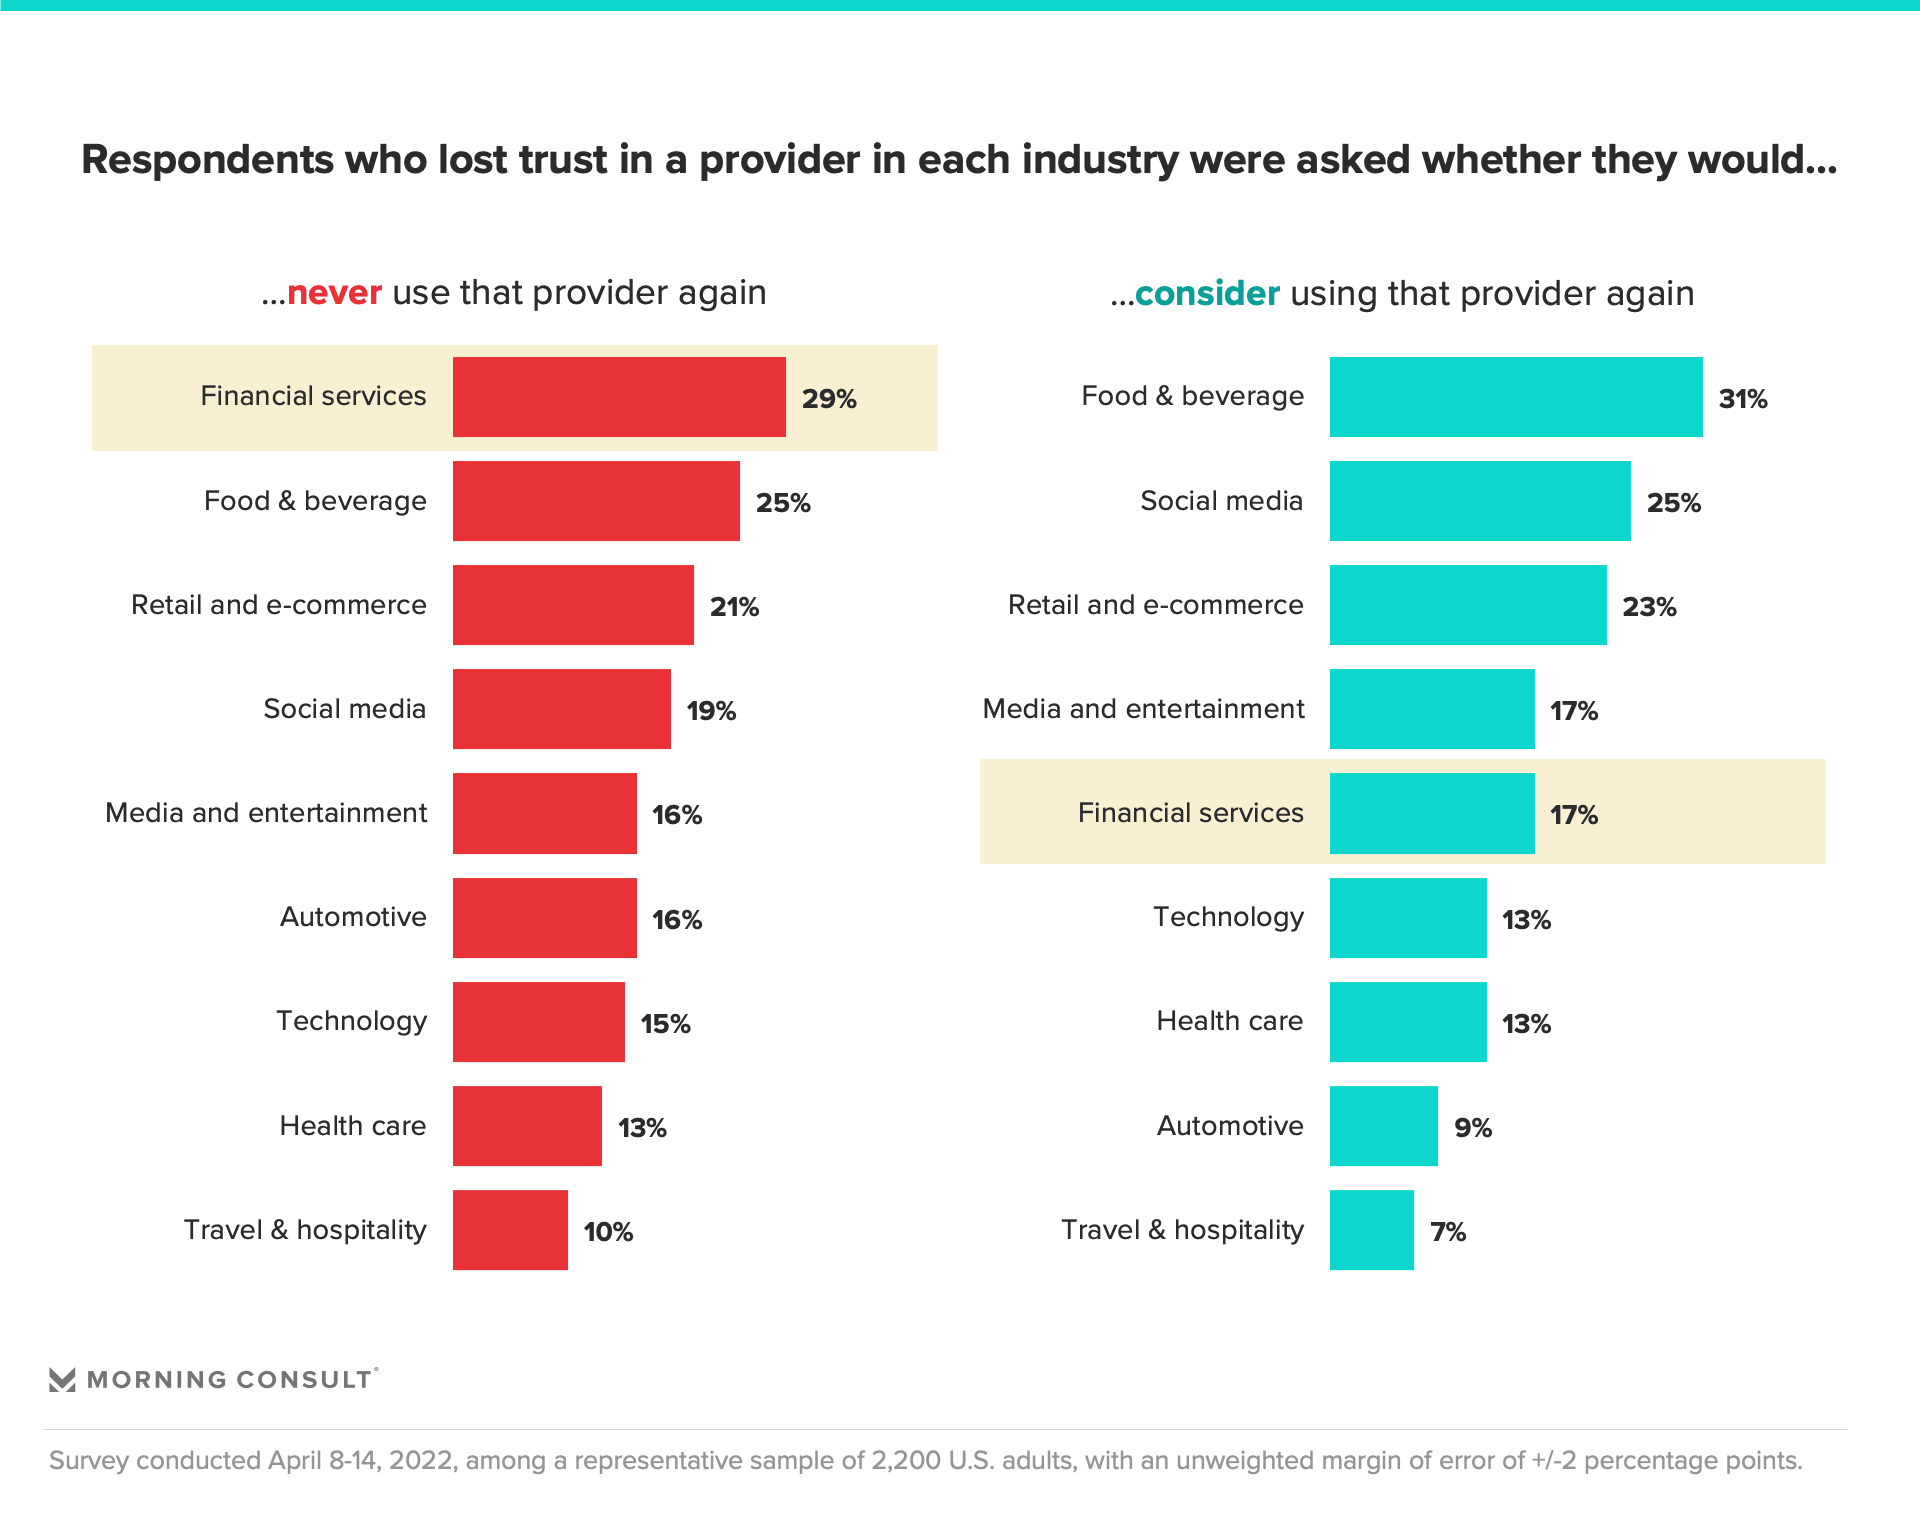 Chart conveying how consumers react to lost trust in each industry